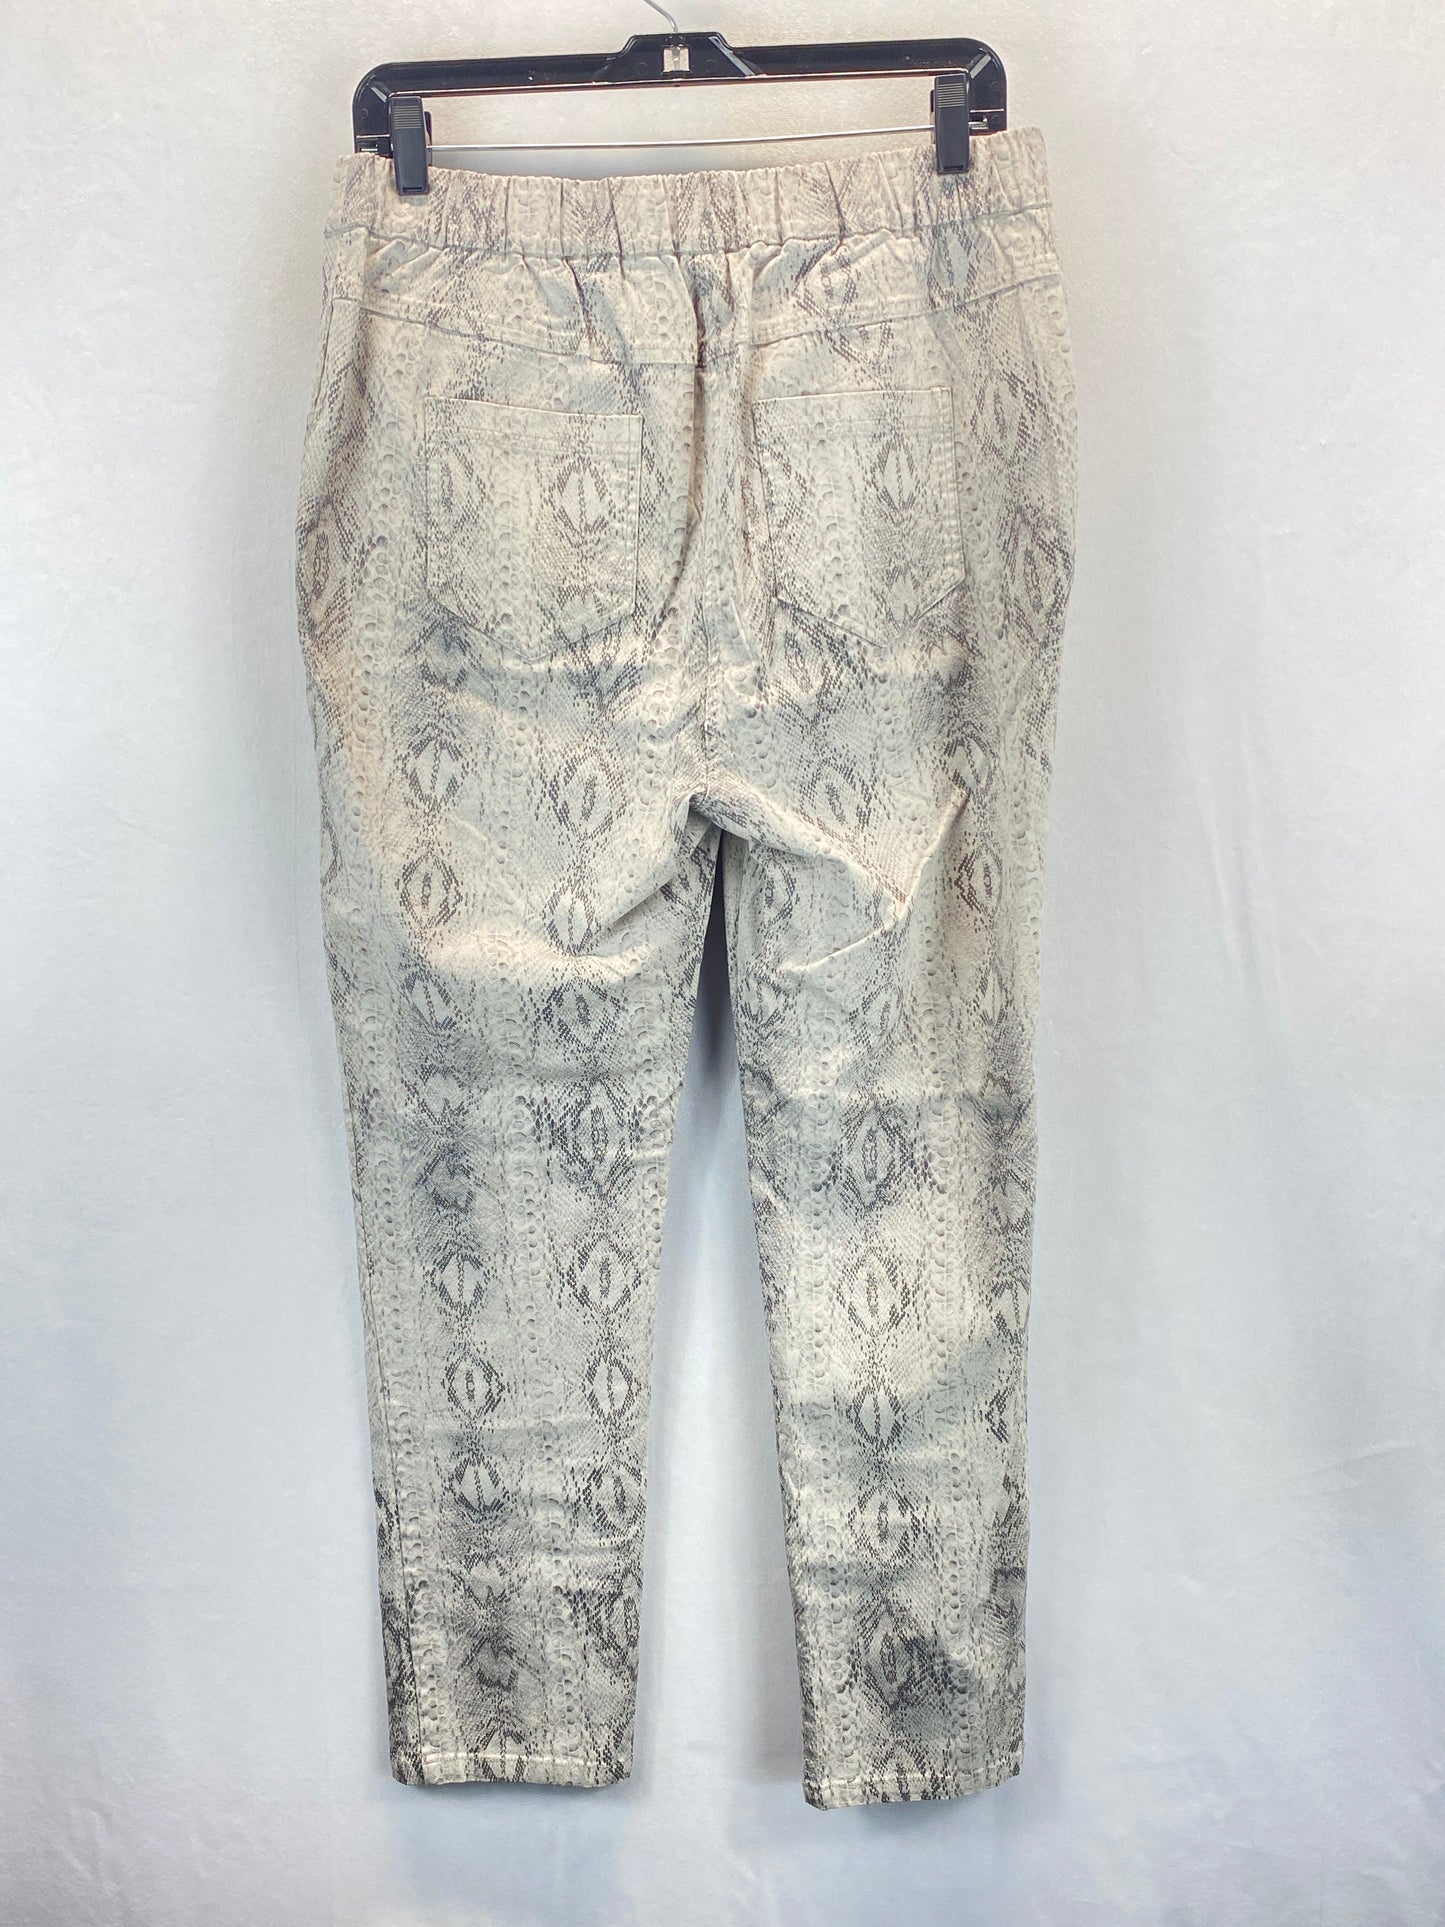 Snakeskin Print Pants Other Clothes Mentor, Size 1x